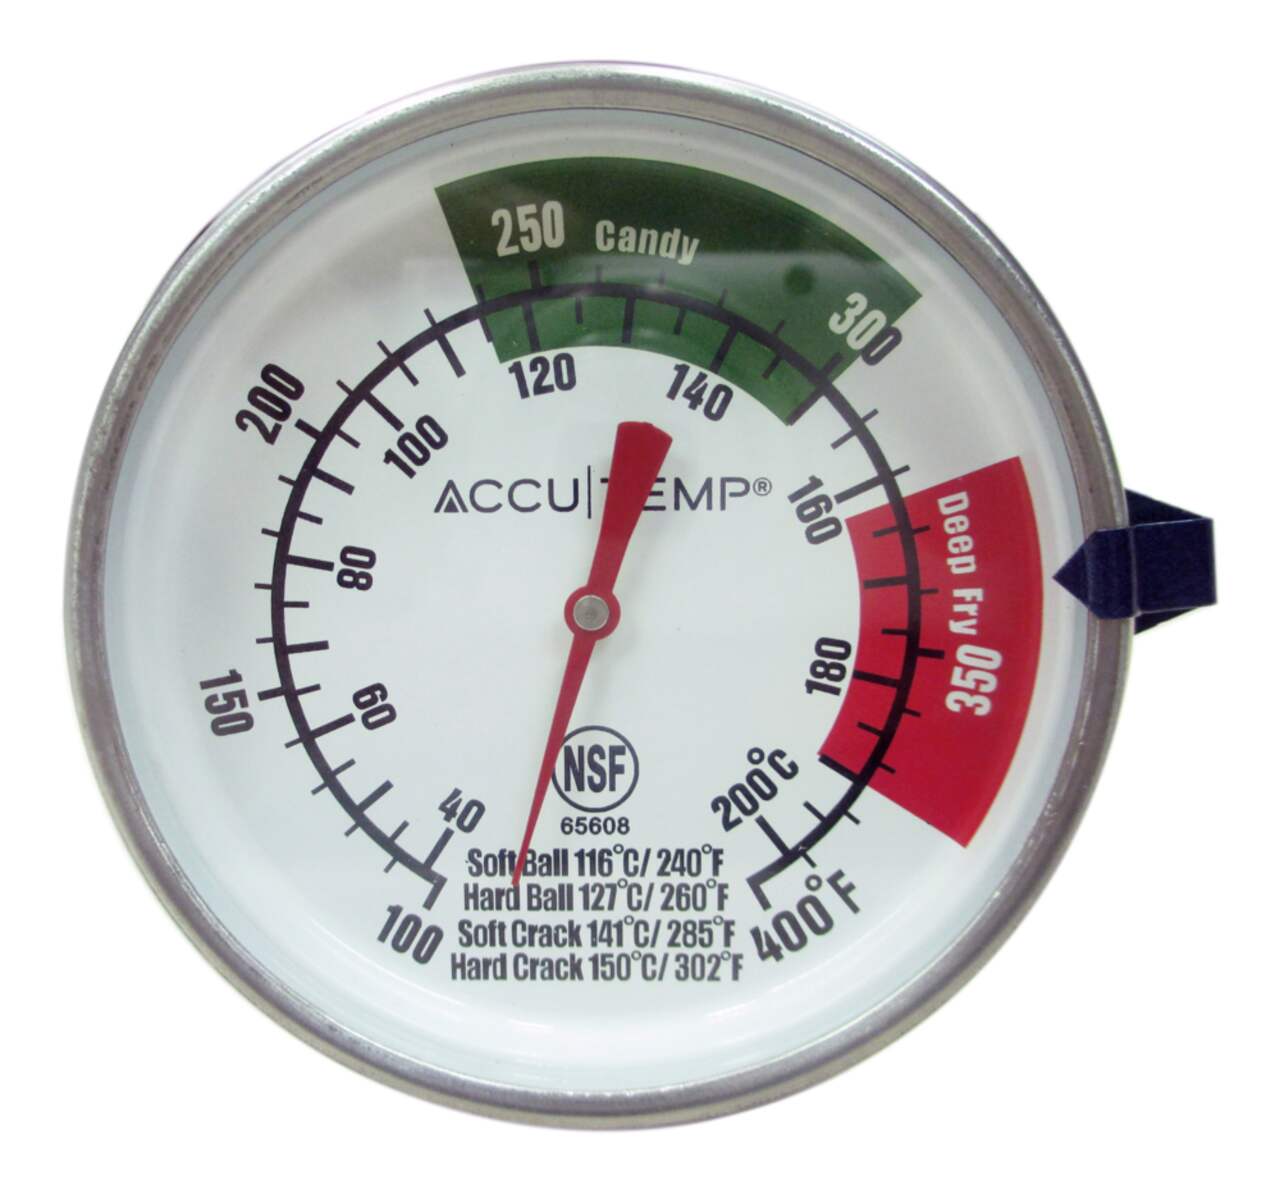 https://media-www.canadiantire.ca/product/living/kitchen/kitchen-tools-thermometers/0423185/professional-deep-fry-thermometer-1c5c8aa0-b30a-4b88-a34c-db6700b40ba3.png?imdensity=1&imwidth=1244&impolicy=mZoom